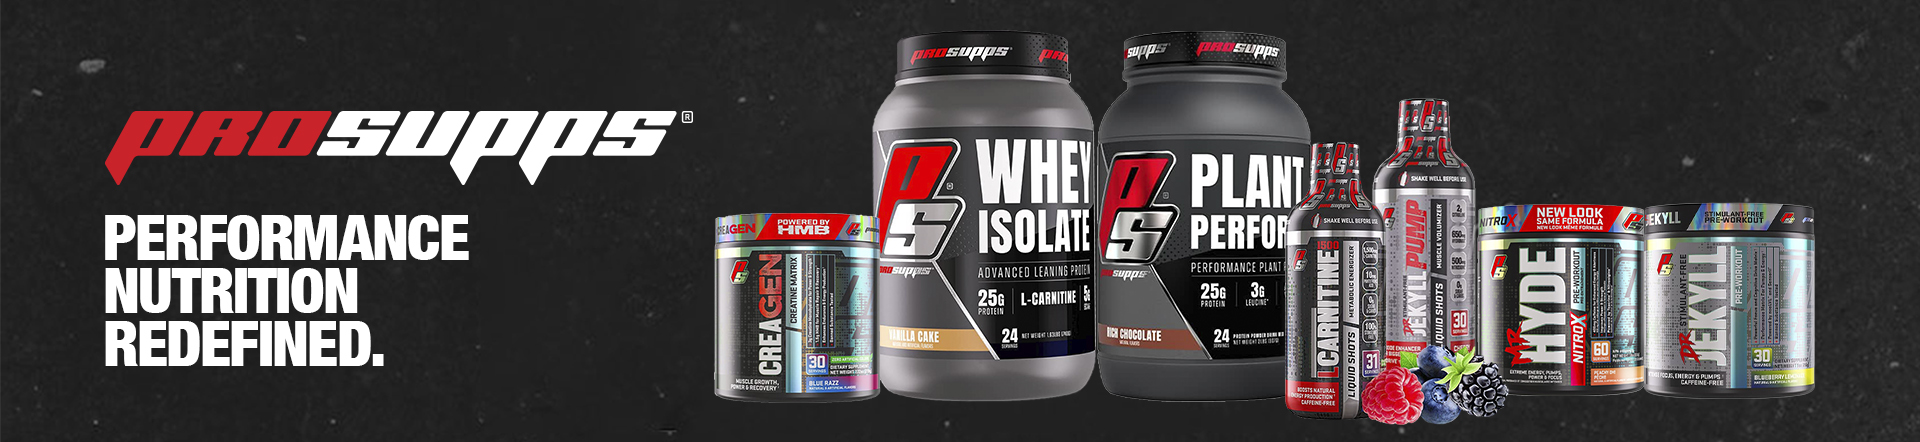 ProSupps Sports Nutrition